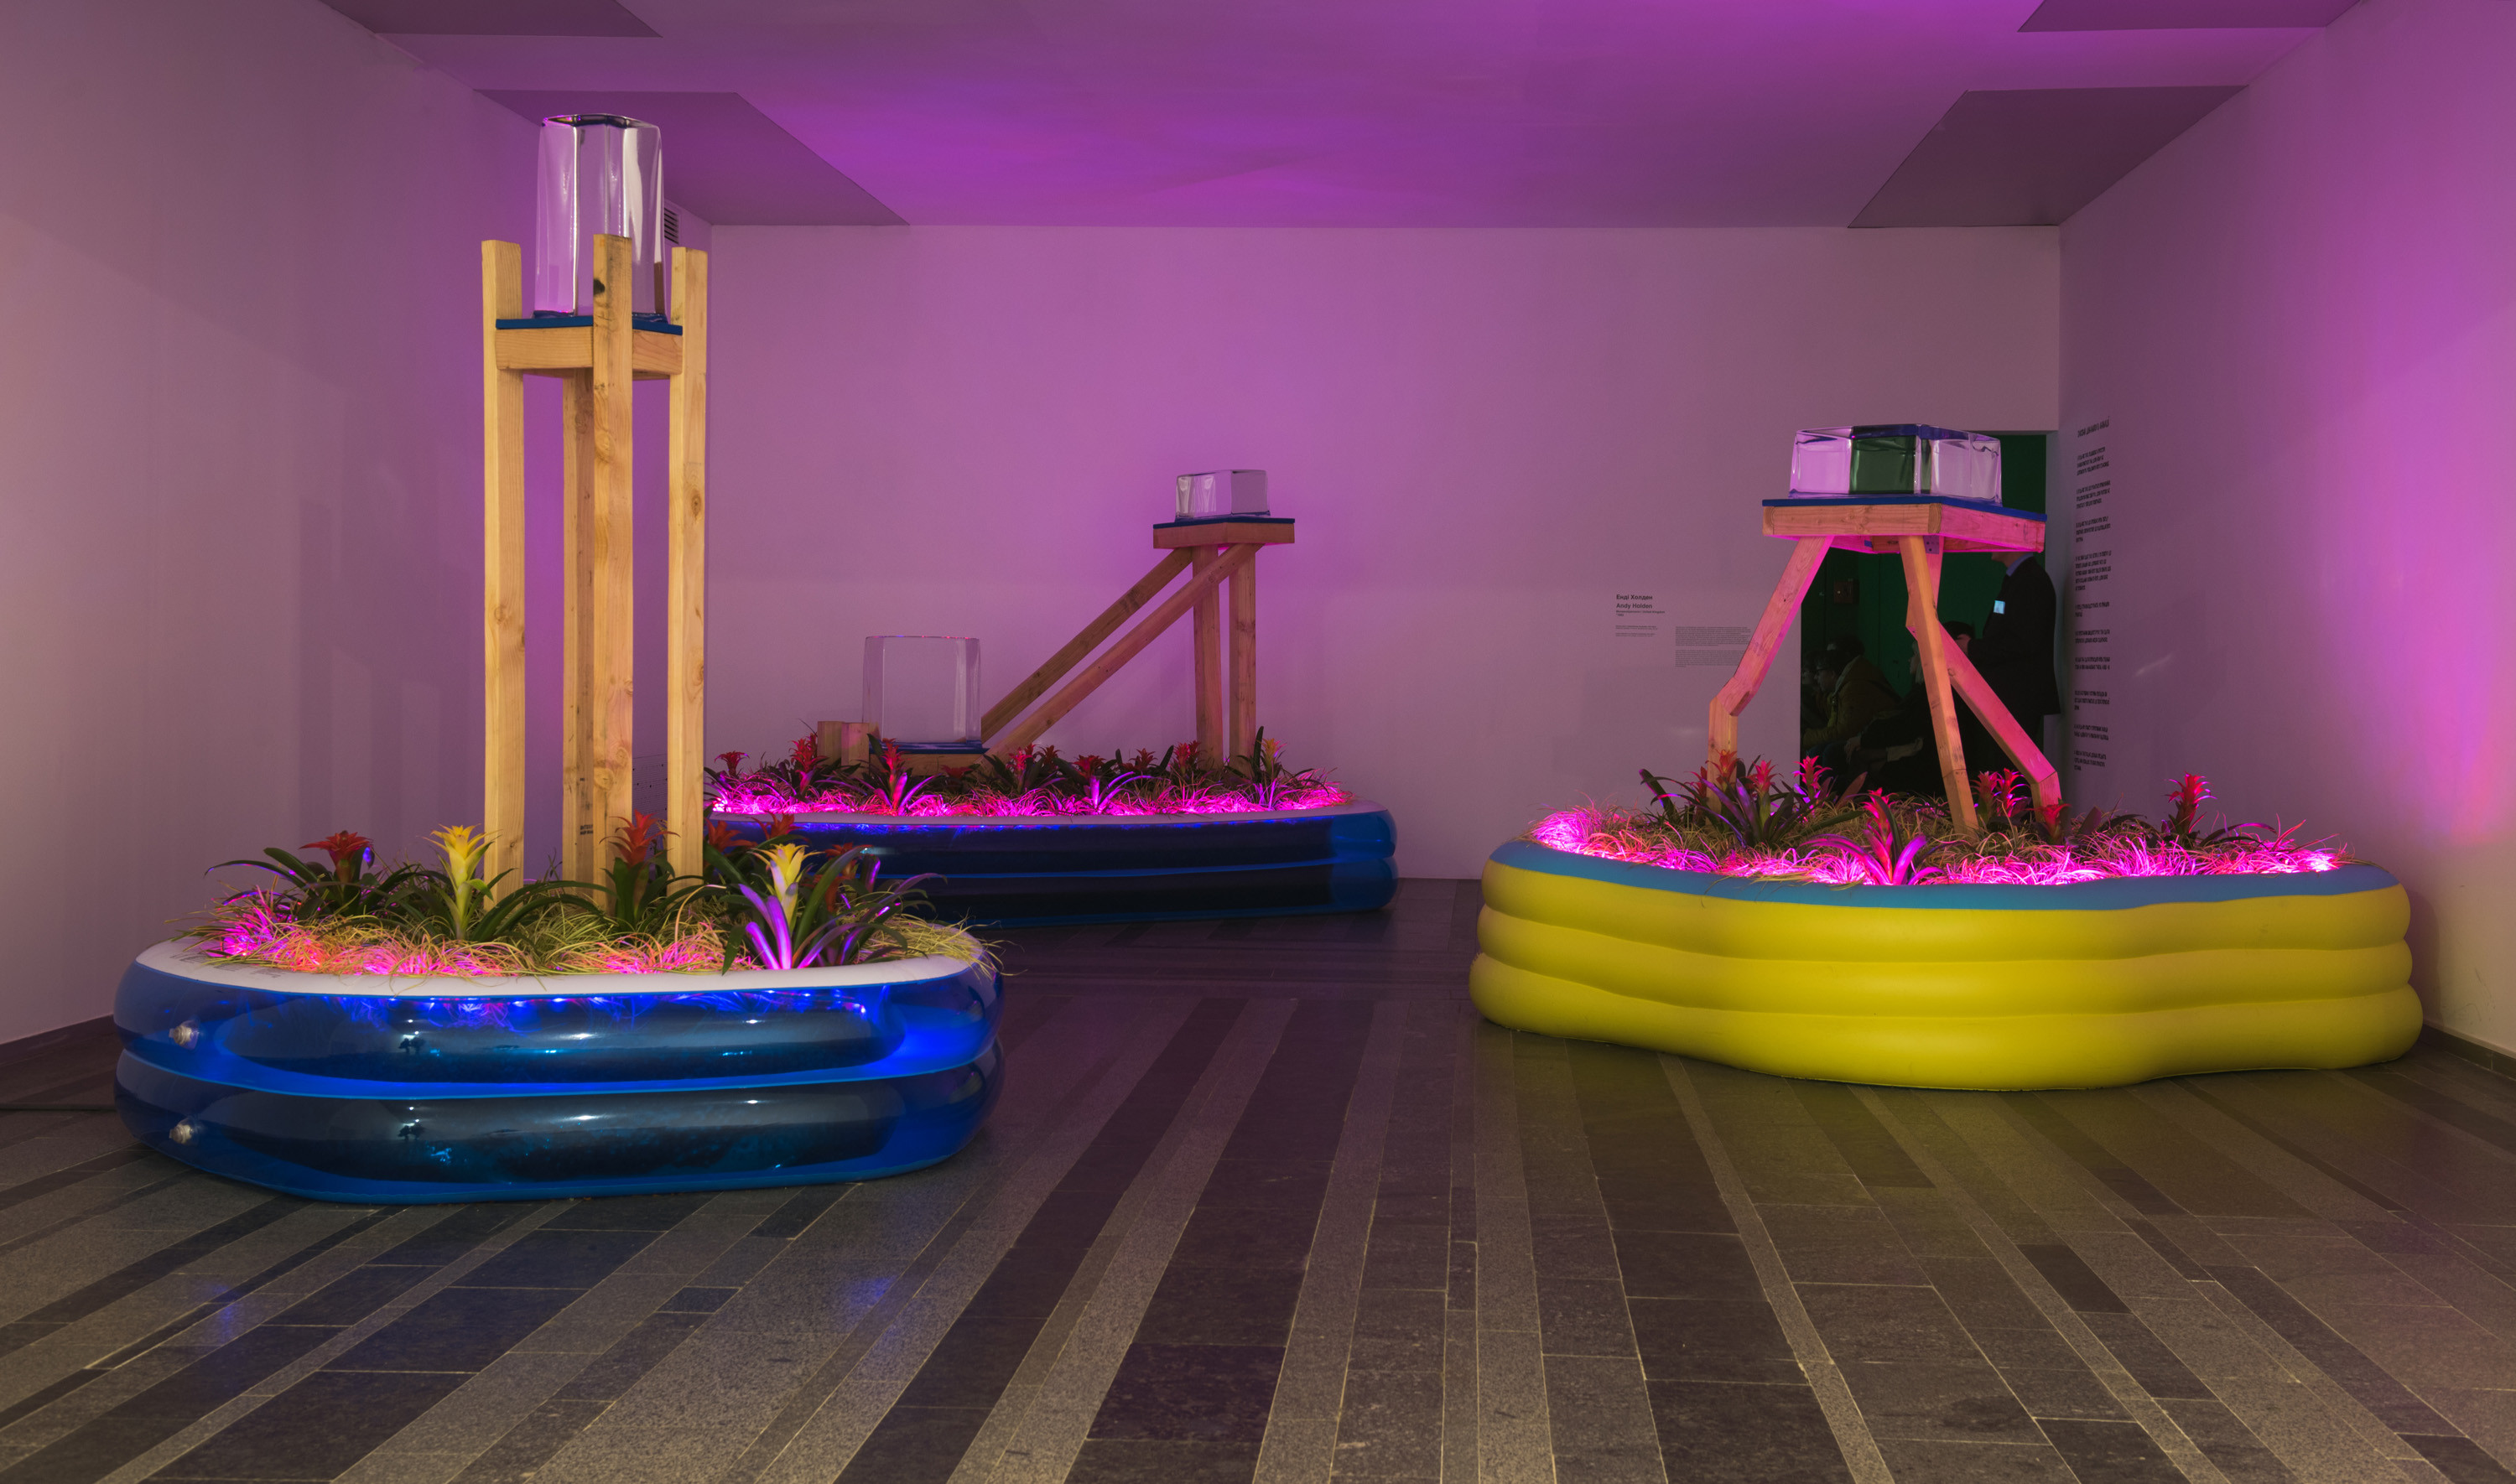 EJ Hill (United States) An Arrangement of Perpetuities, 2017. Wood, ice, soil, plants, inflatable vinyl pools, LEDs. PinchukArtCentre © 2017. Photographed by Sergey Illin